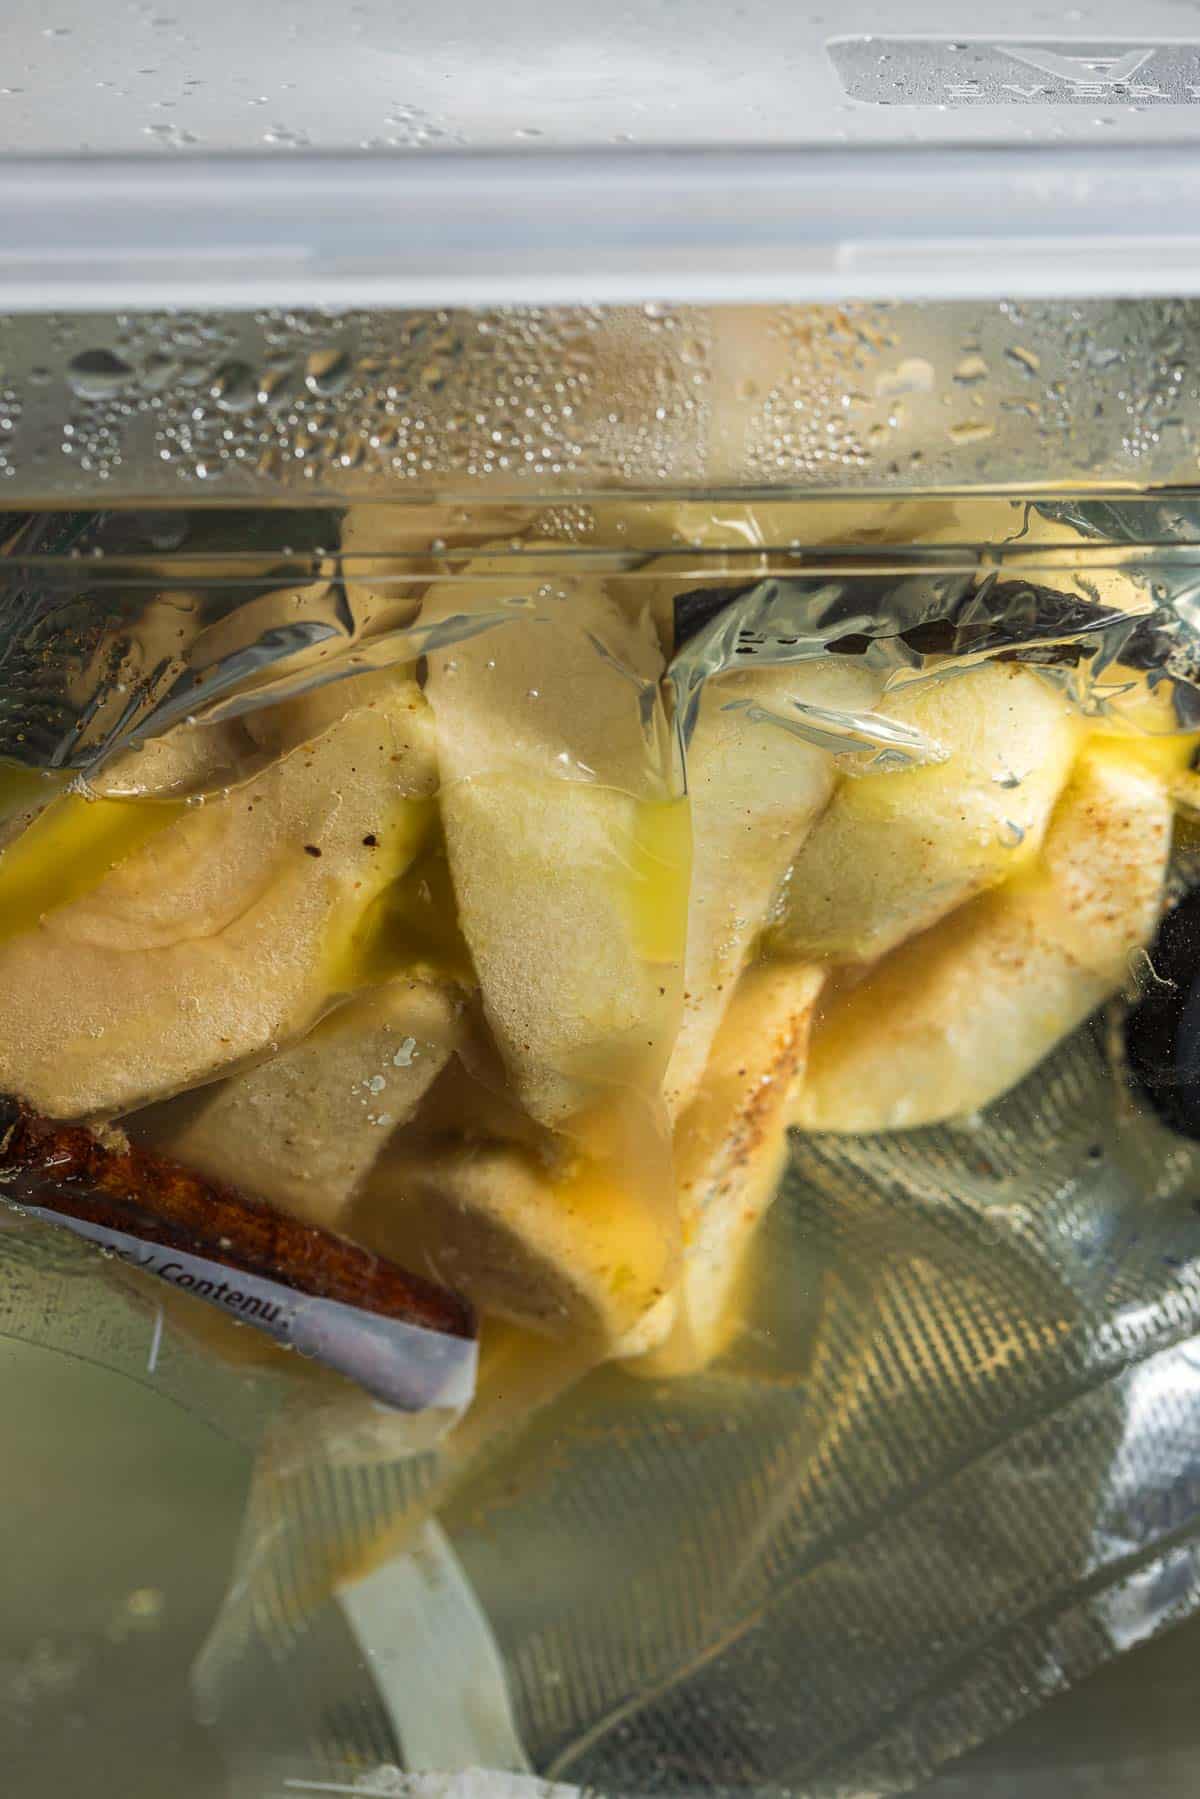 sliced apples in a bag cooking in a water bath